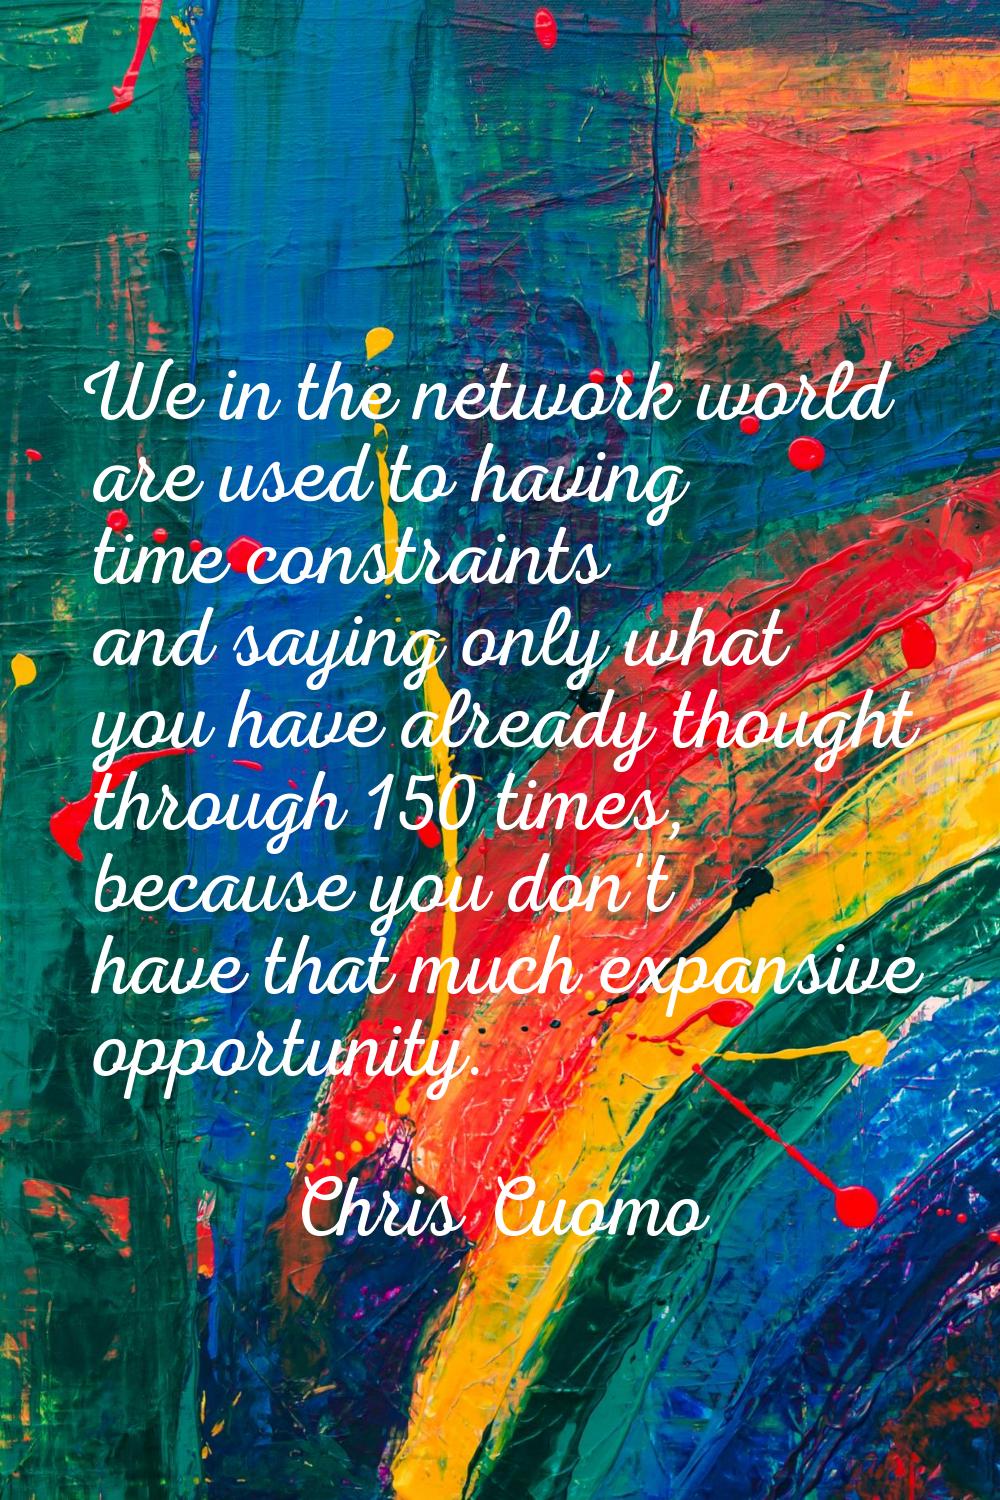 We in the network world are used to having time constraints and saying only what you have already t